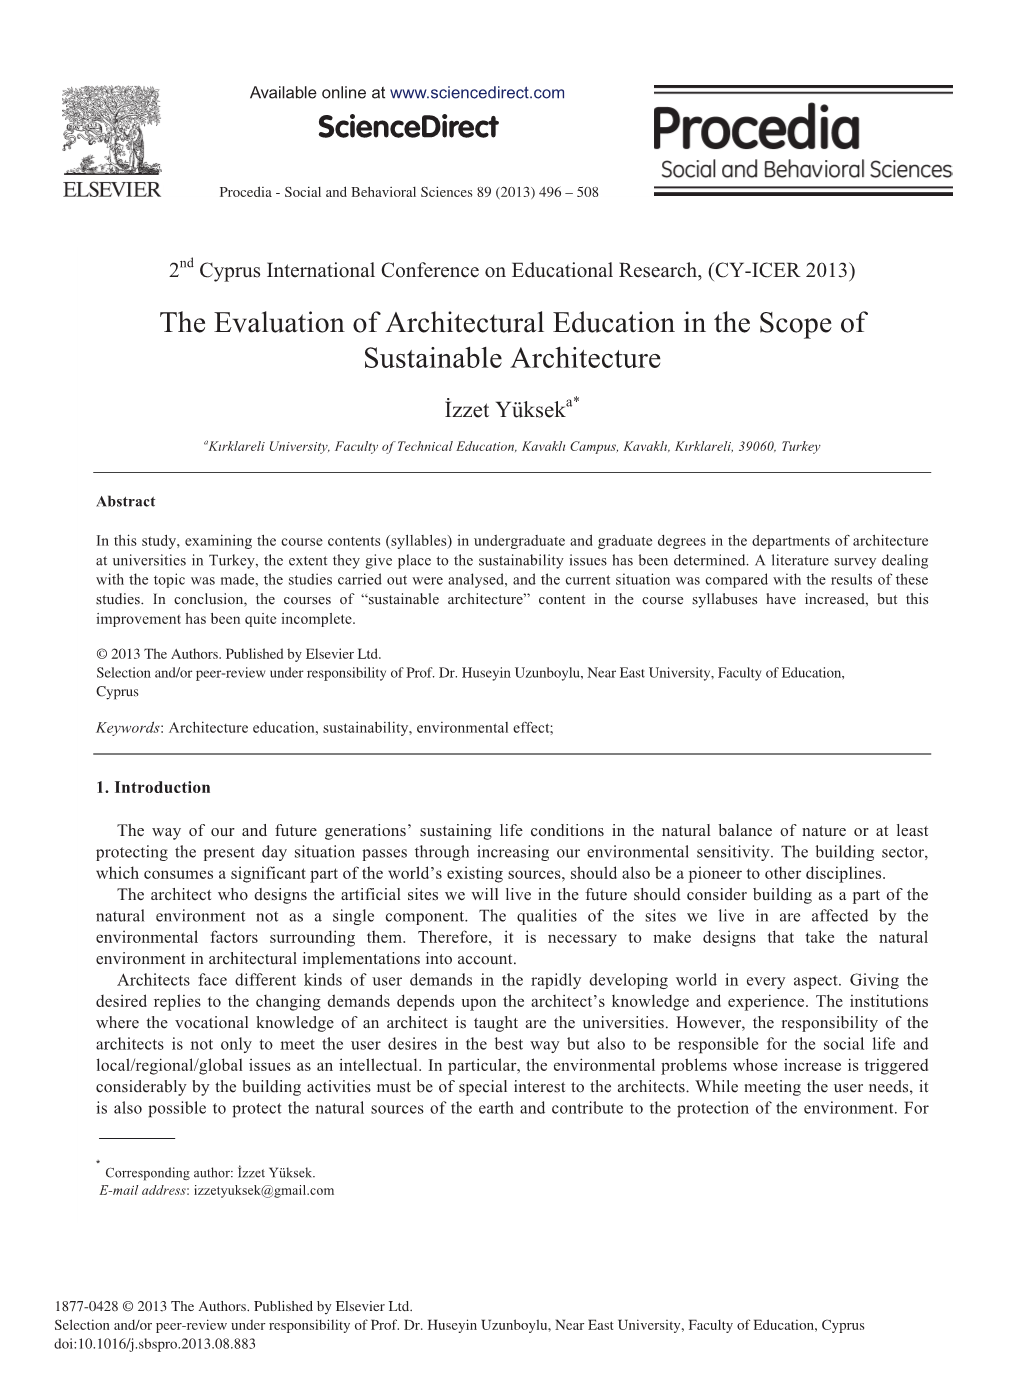 The Evaluation of Architectural Education in the Scope of Sustainable Architecture